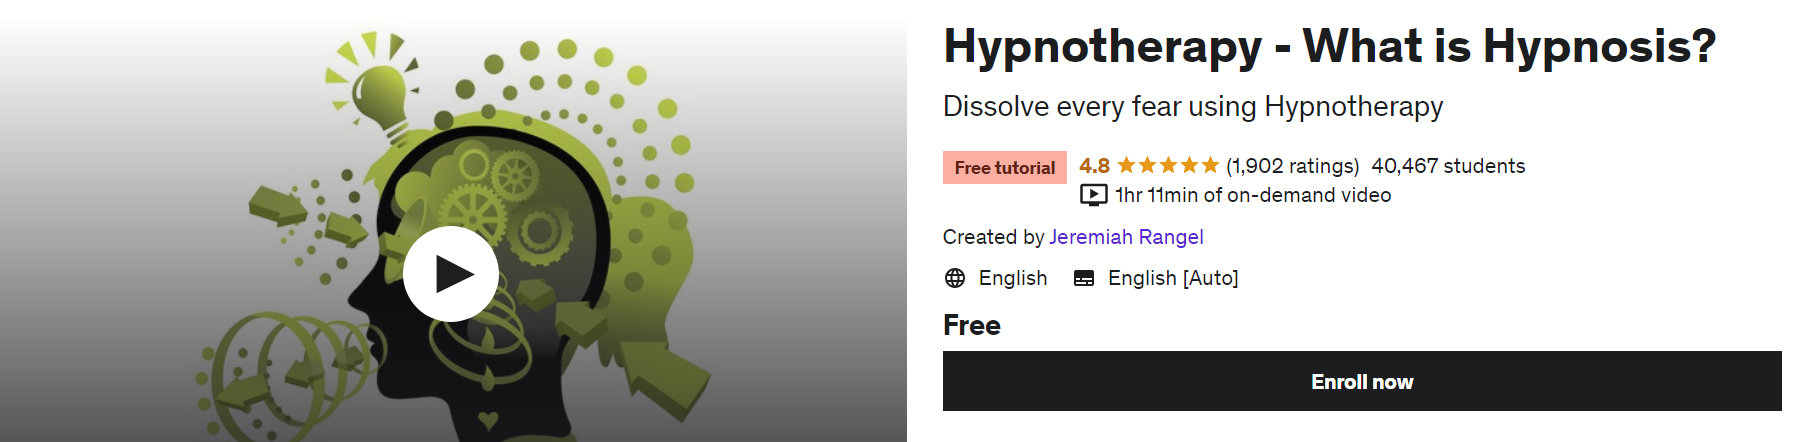 Udemy Free Hypnotherapy Tutorial - Hypnotherapy - What is Hypnosis